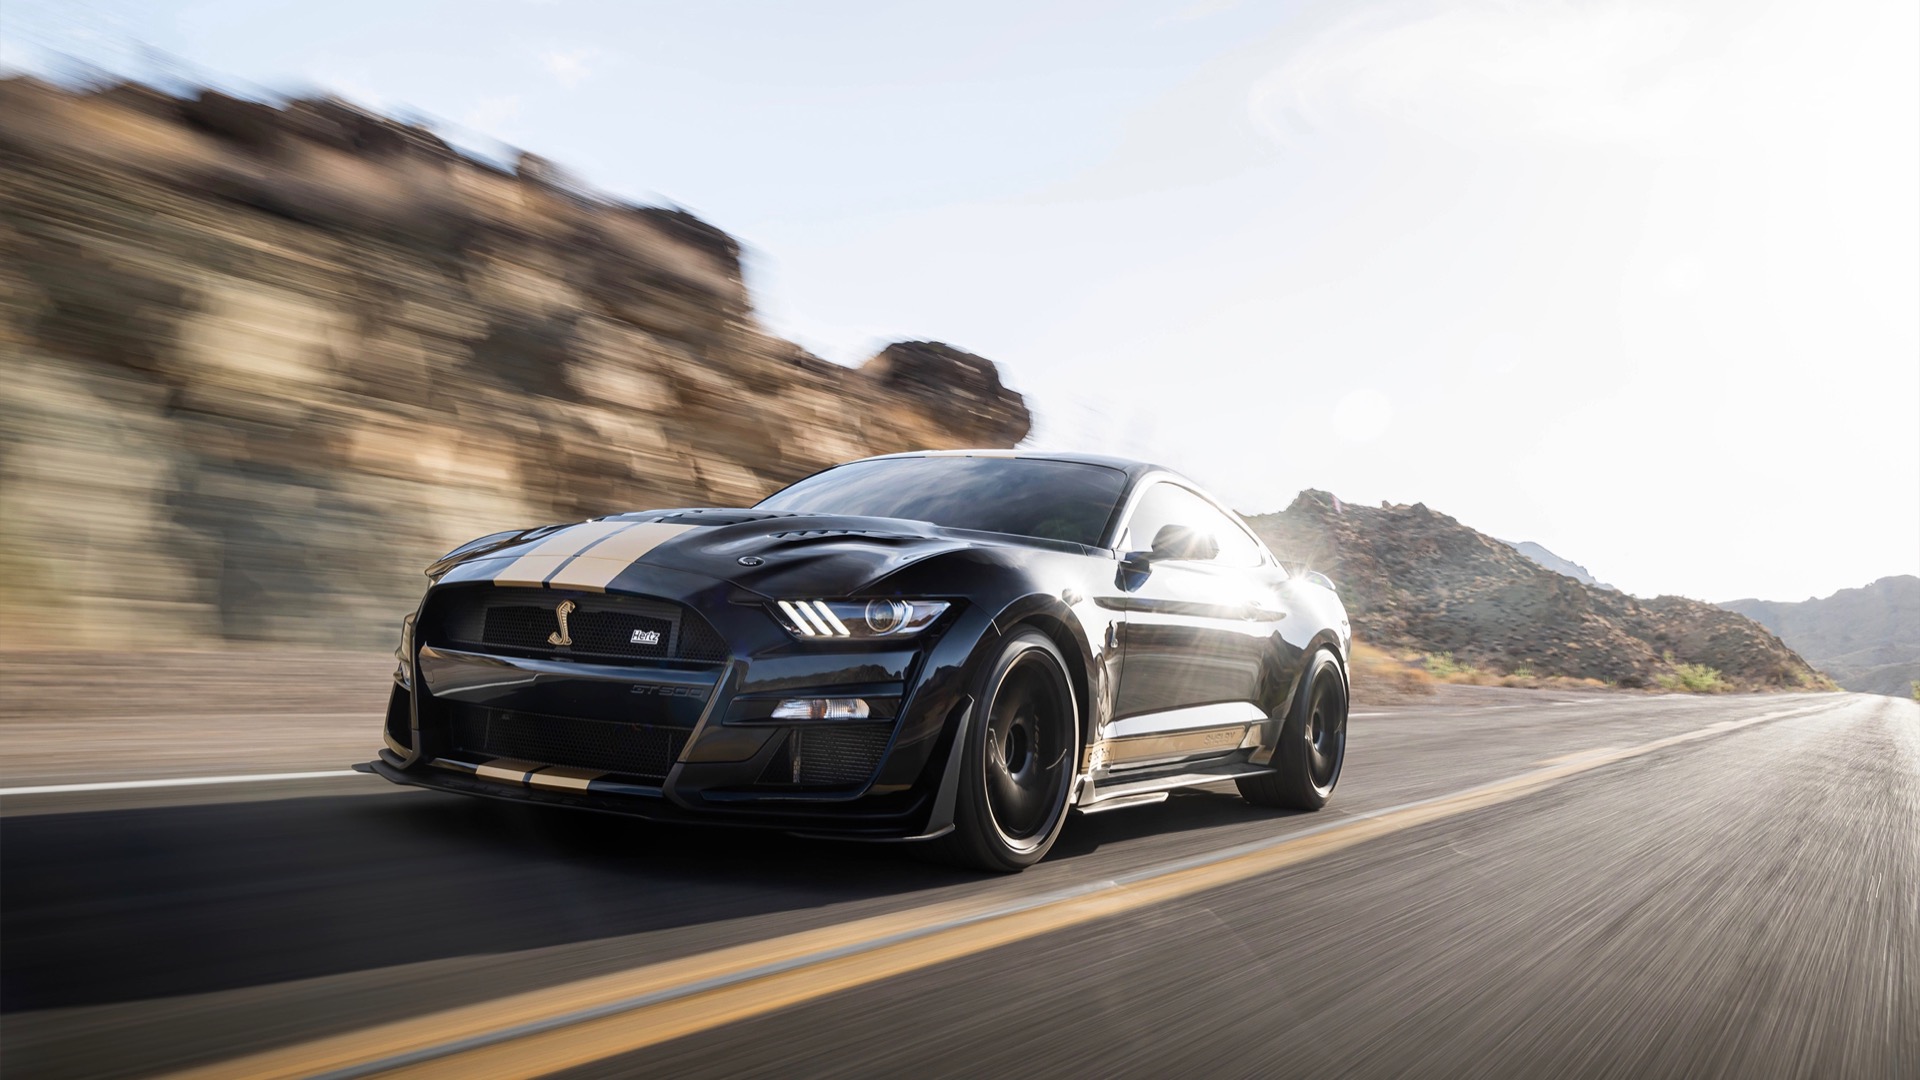 Hertz rent a racer program returns with 900 plus hp Ford Mustang Shelby GT500 H